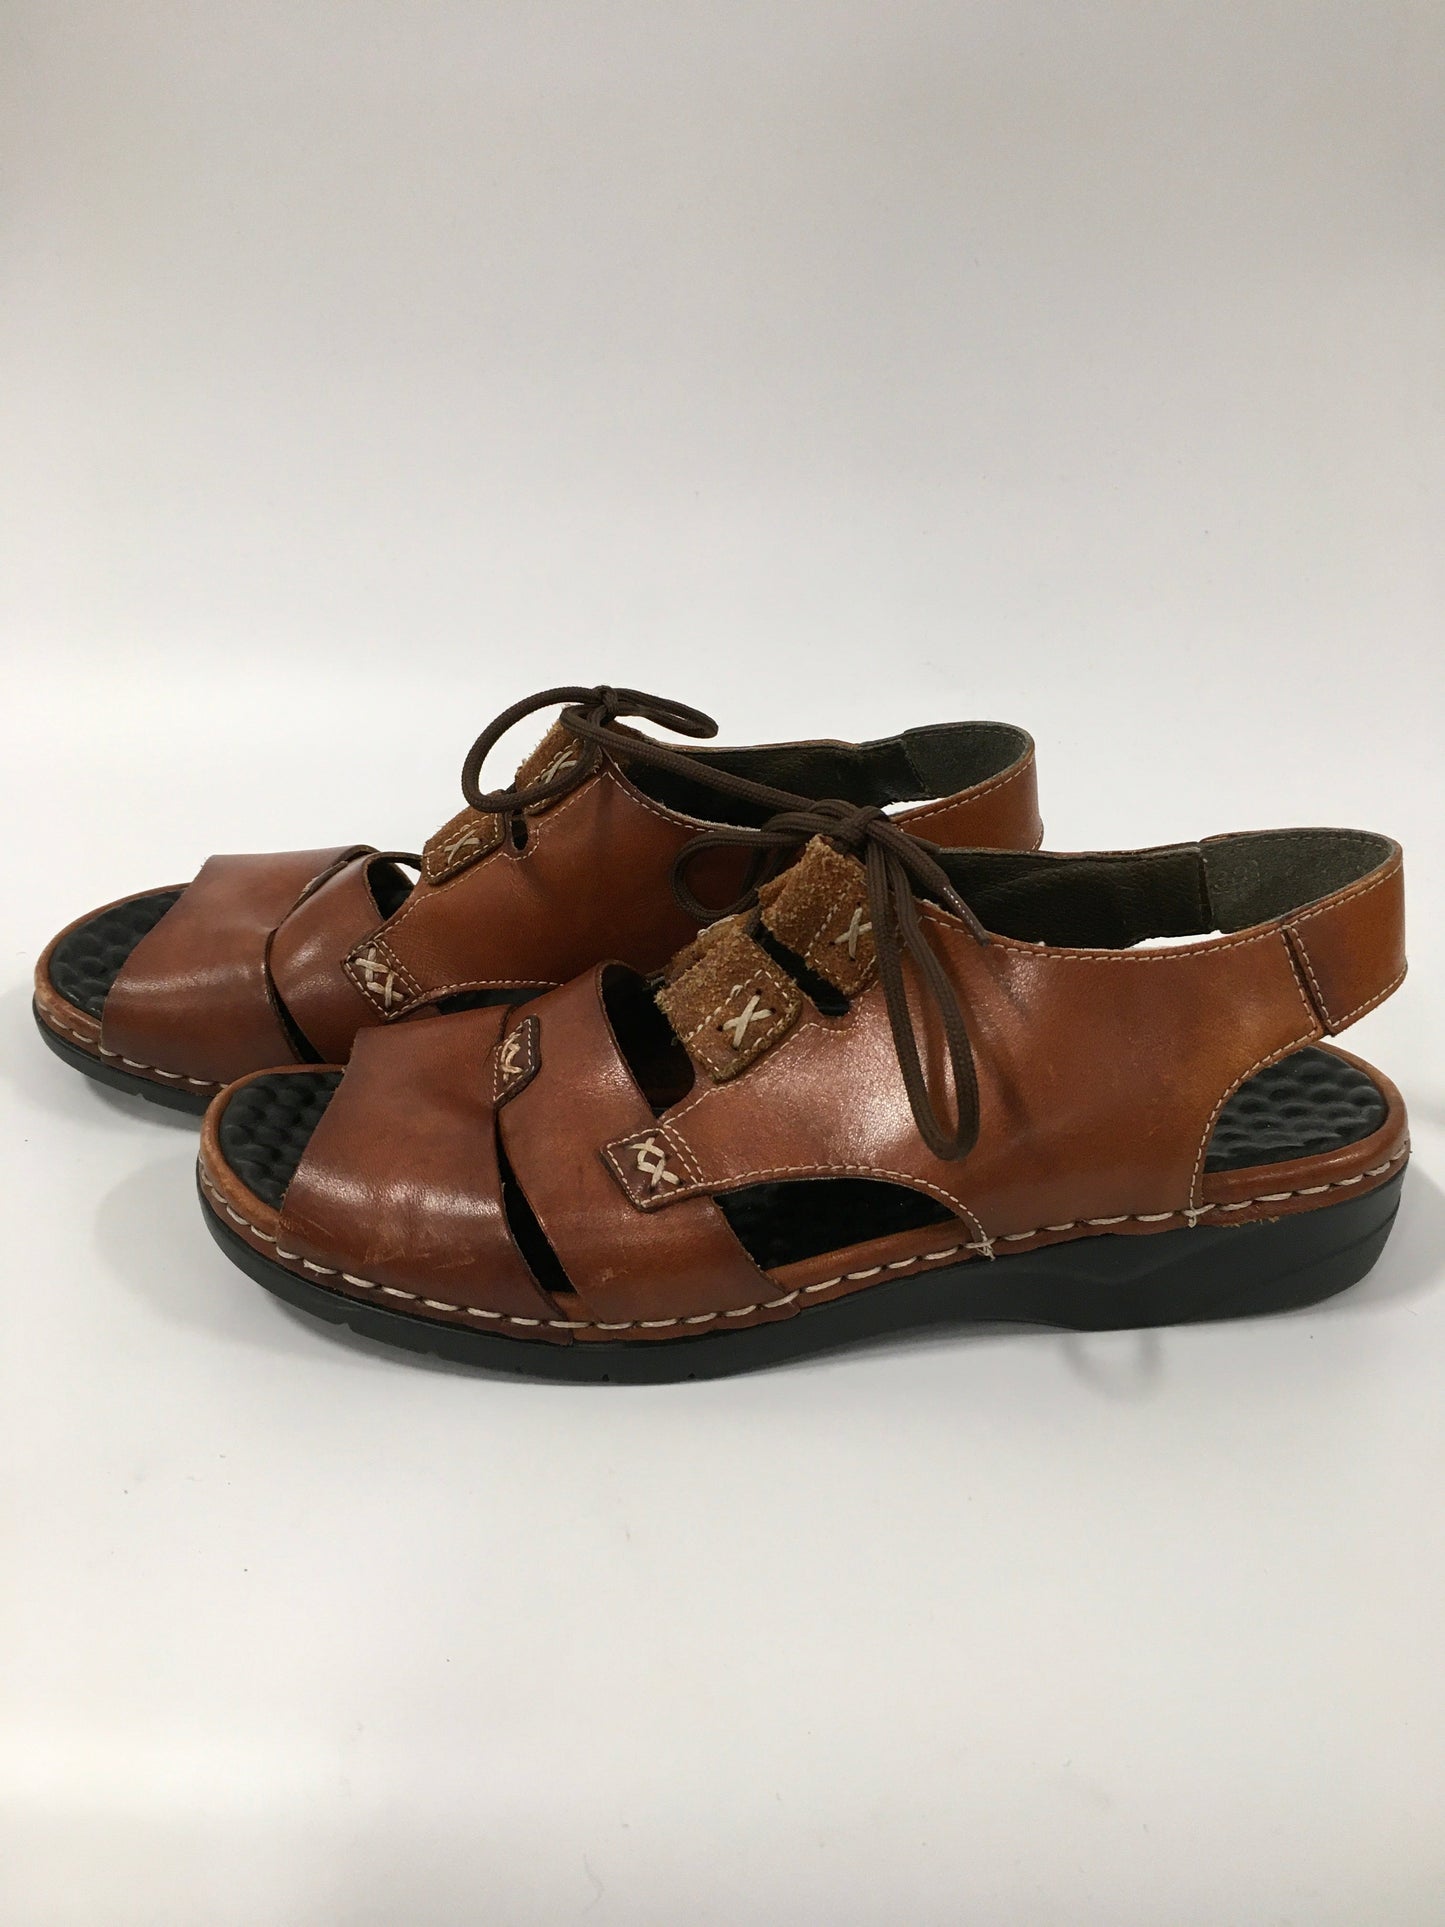 Brown Sandals Flats Clothes Mentor, Size 7.5